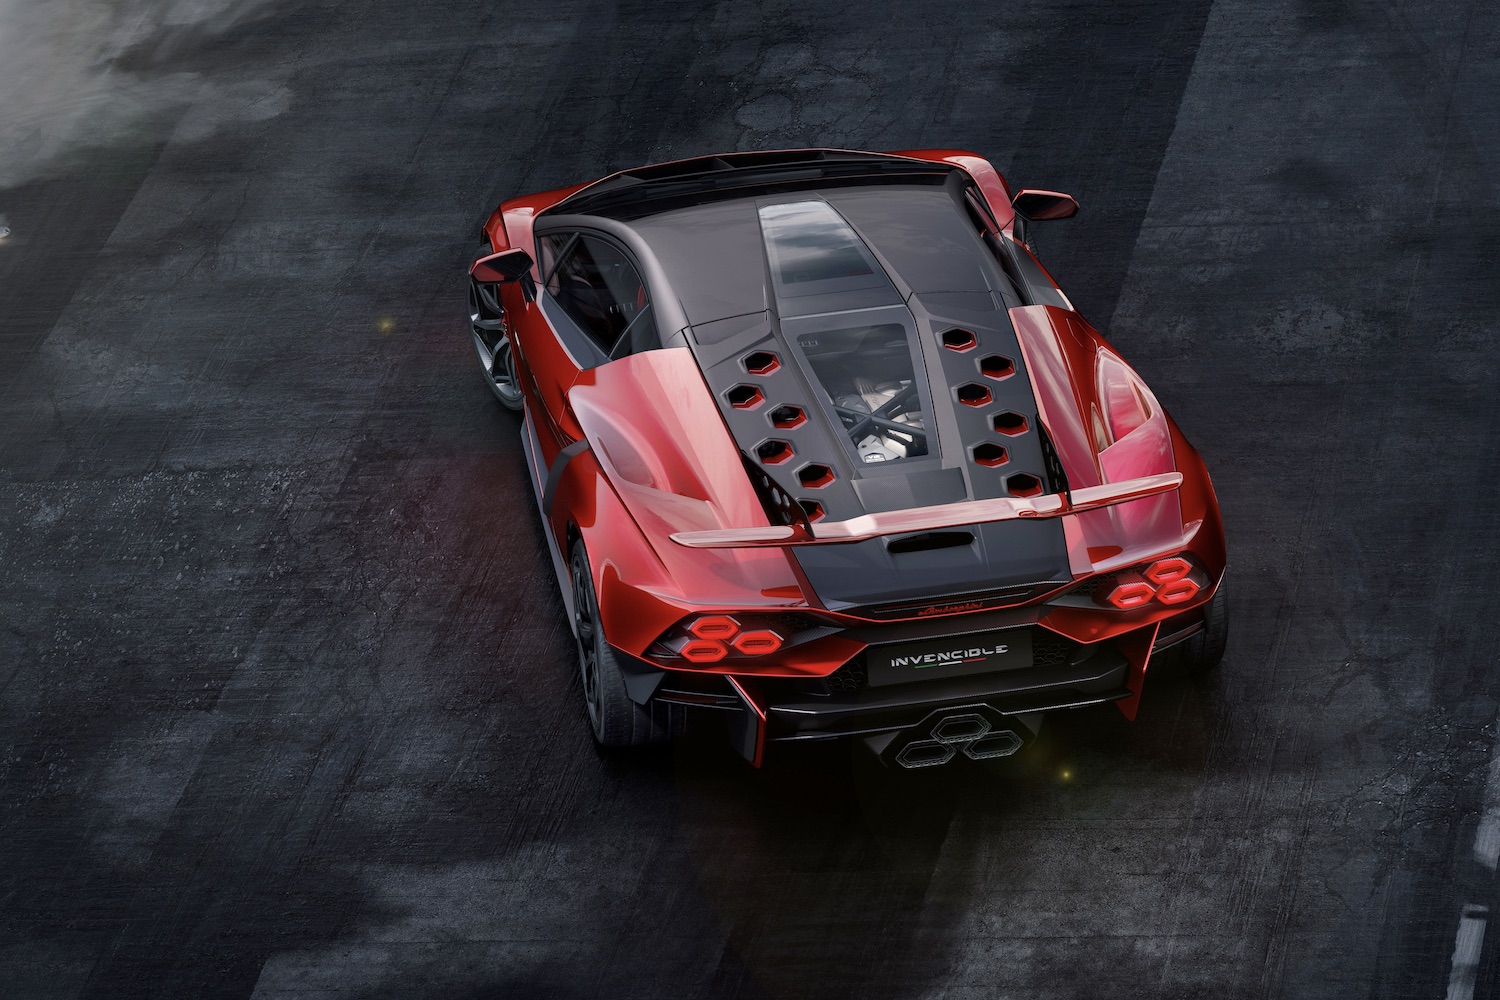 Rear end angle of Lamborghini Invencible from overhead showcasing engine and rear wing on wet tarmac.